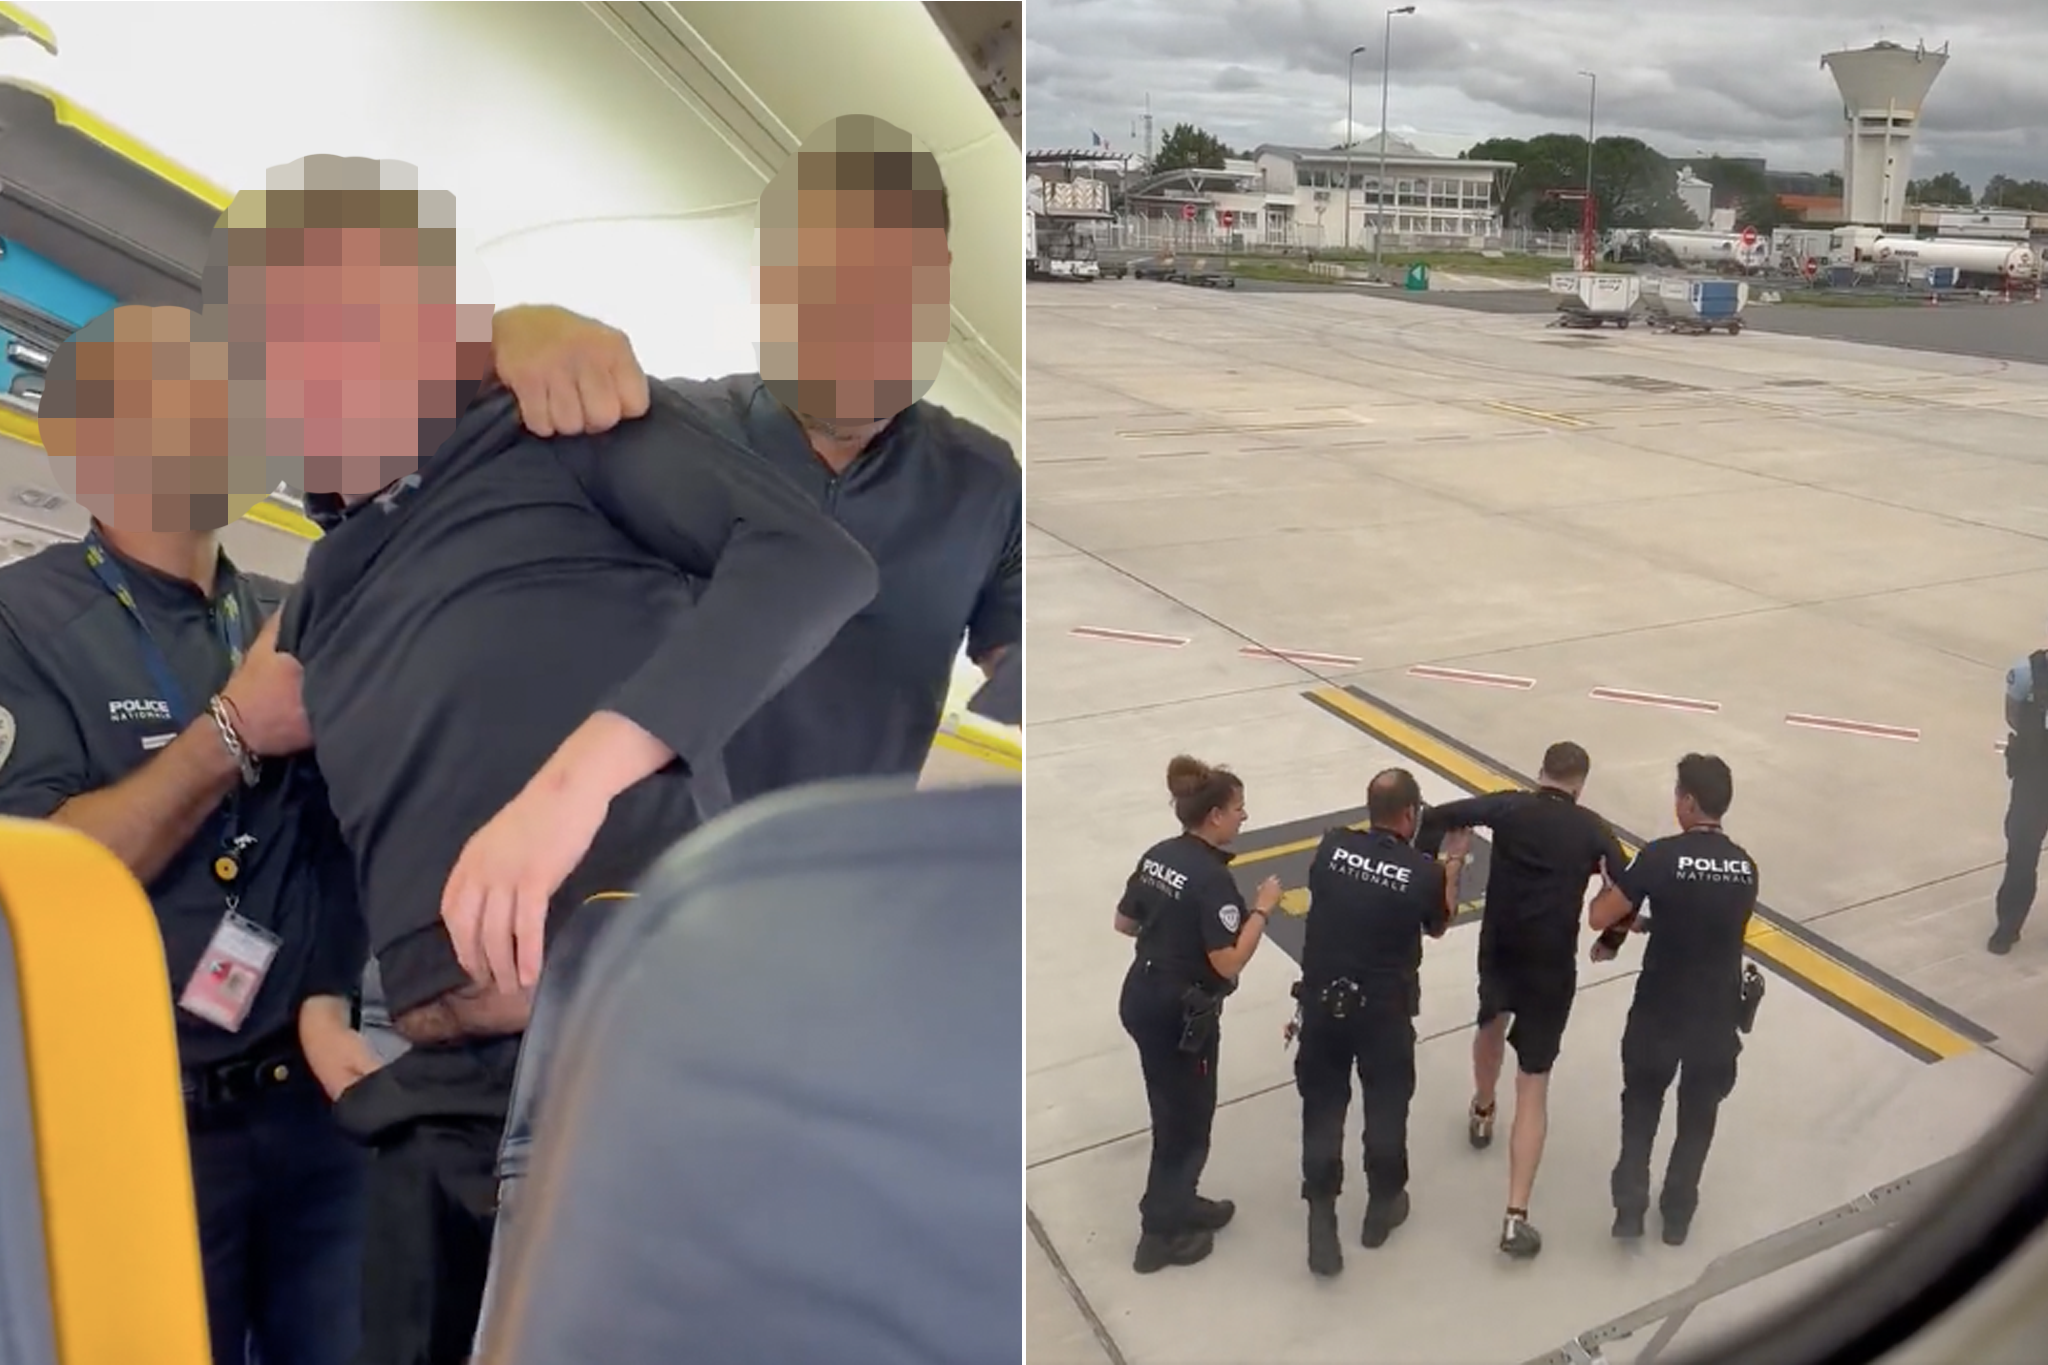 The man was escorted off the plane by three police officers in Bordeaux